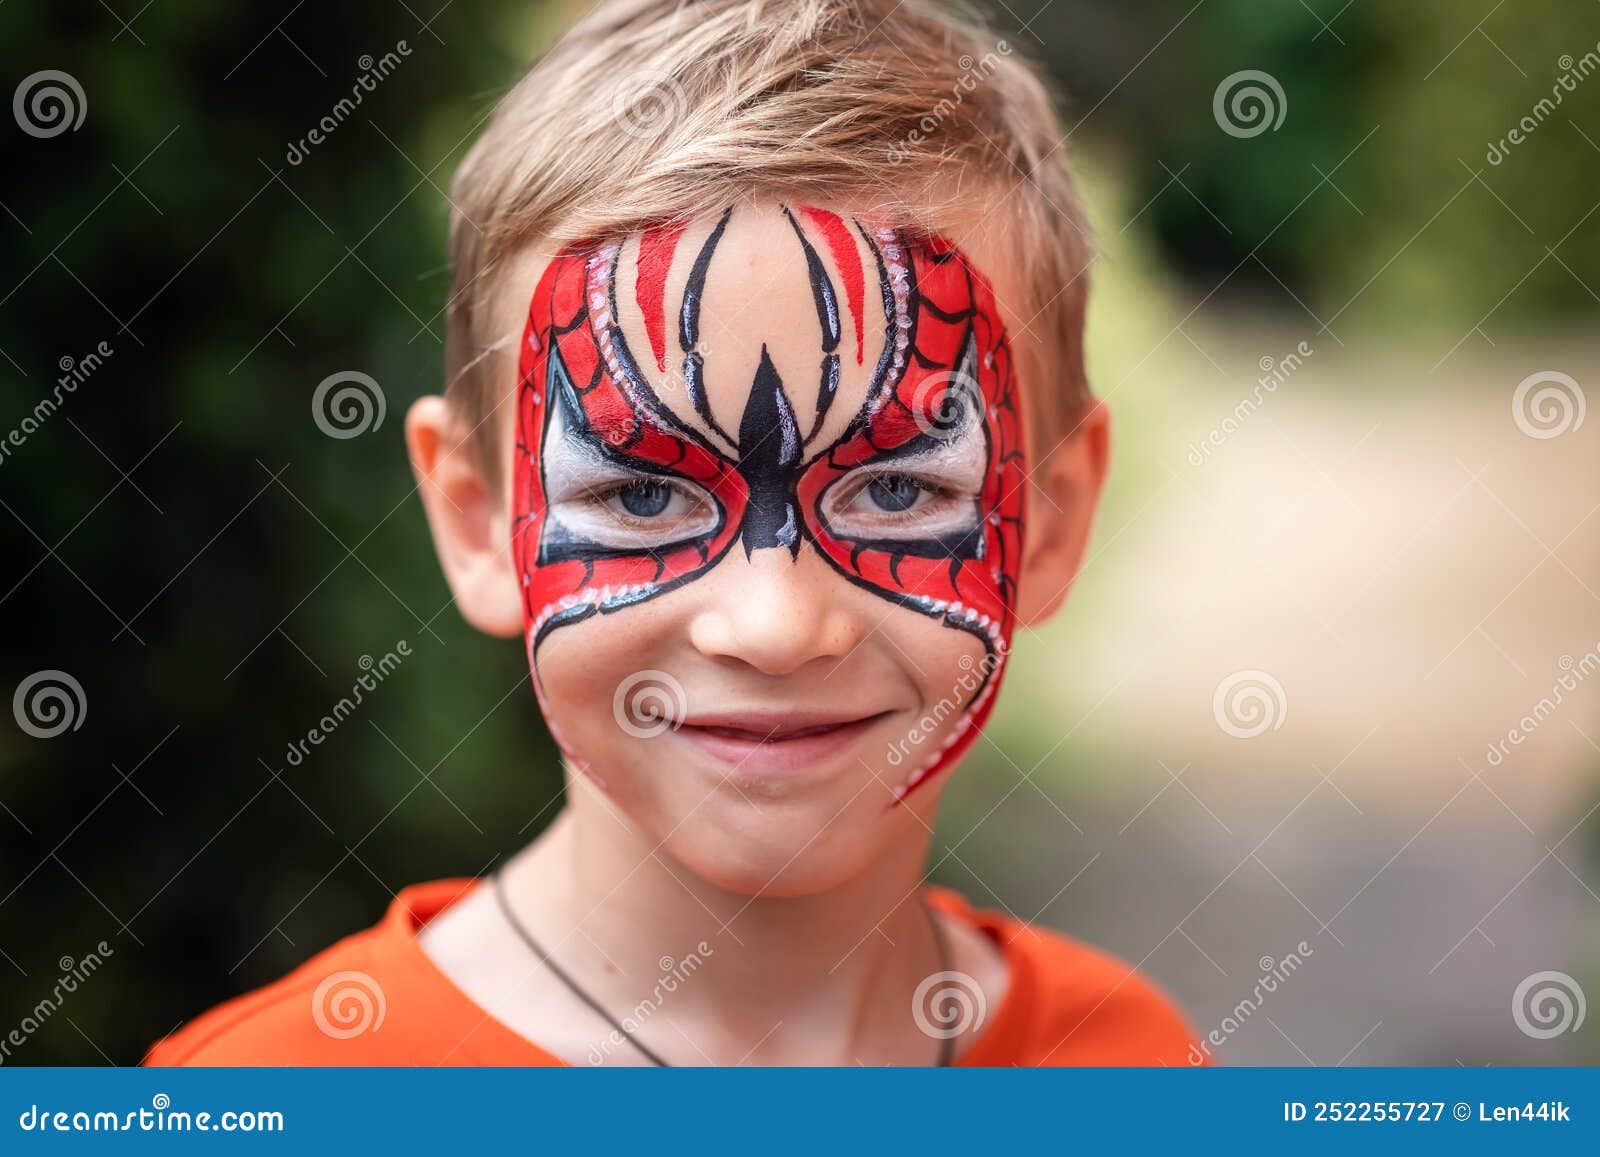 Cute Little Boy with His Face Painted Stock Image - Image of ...